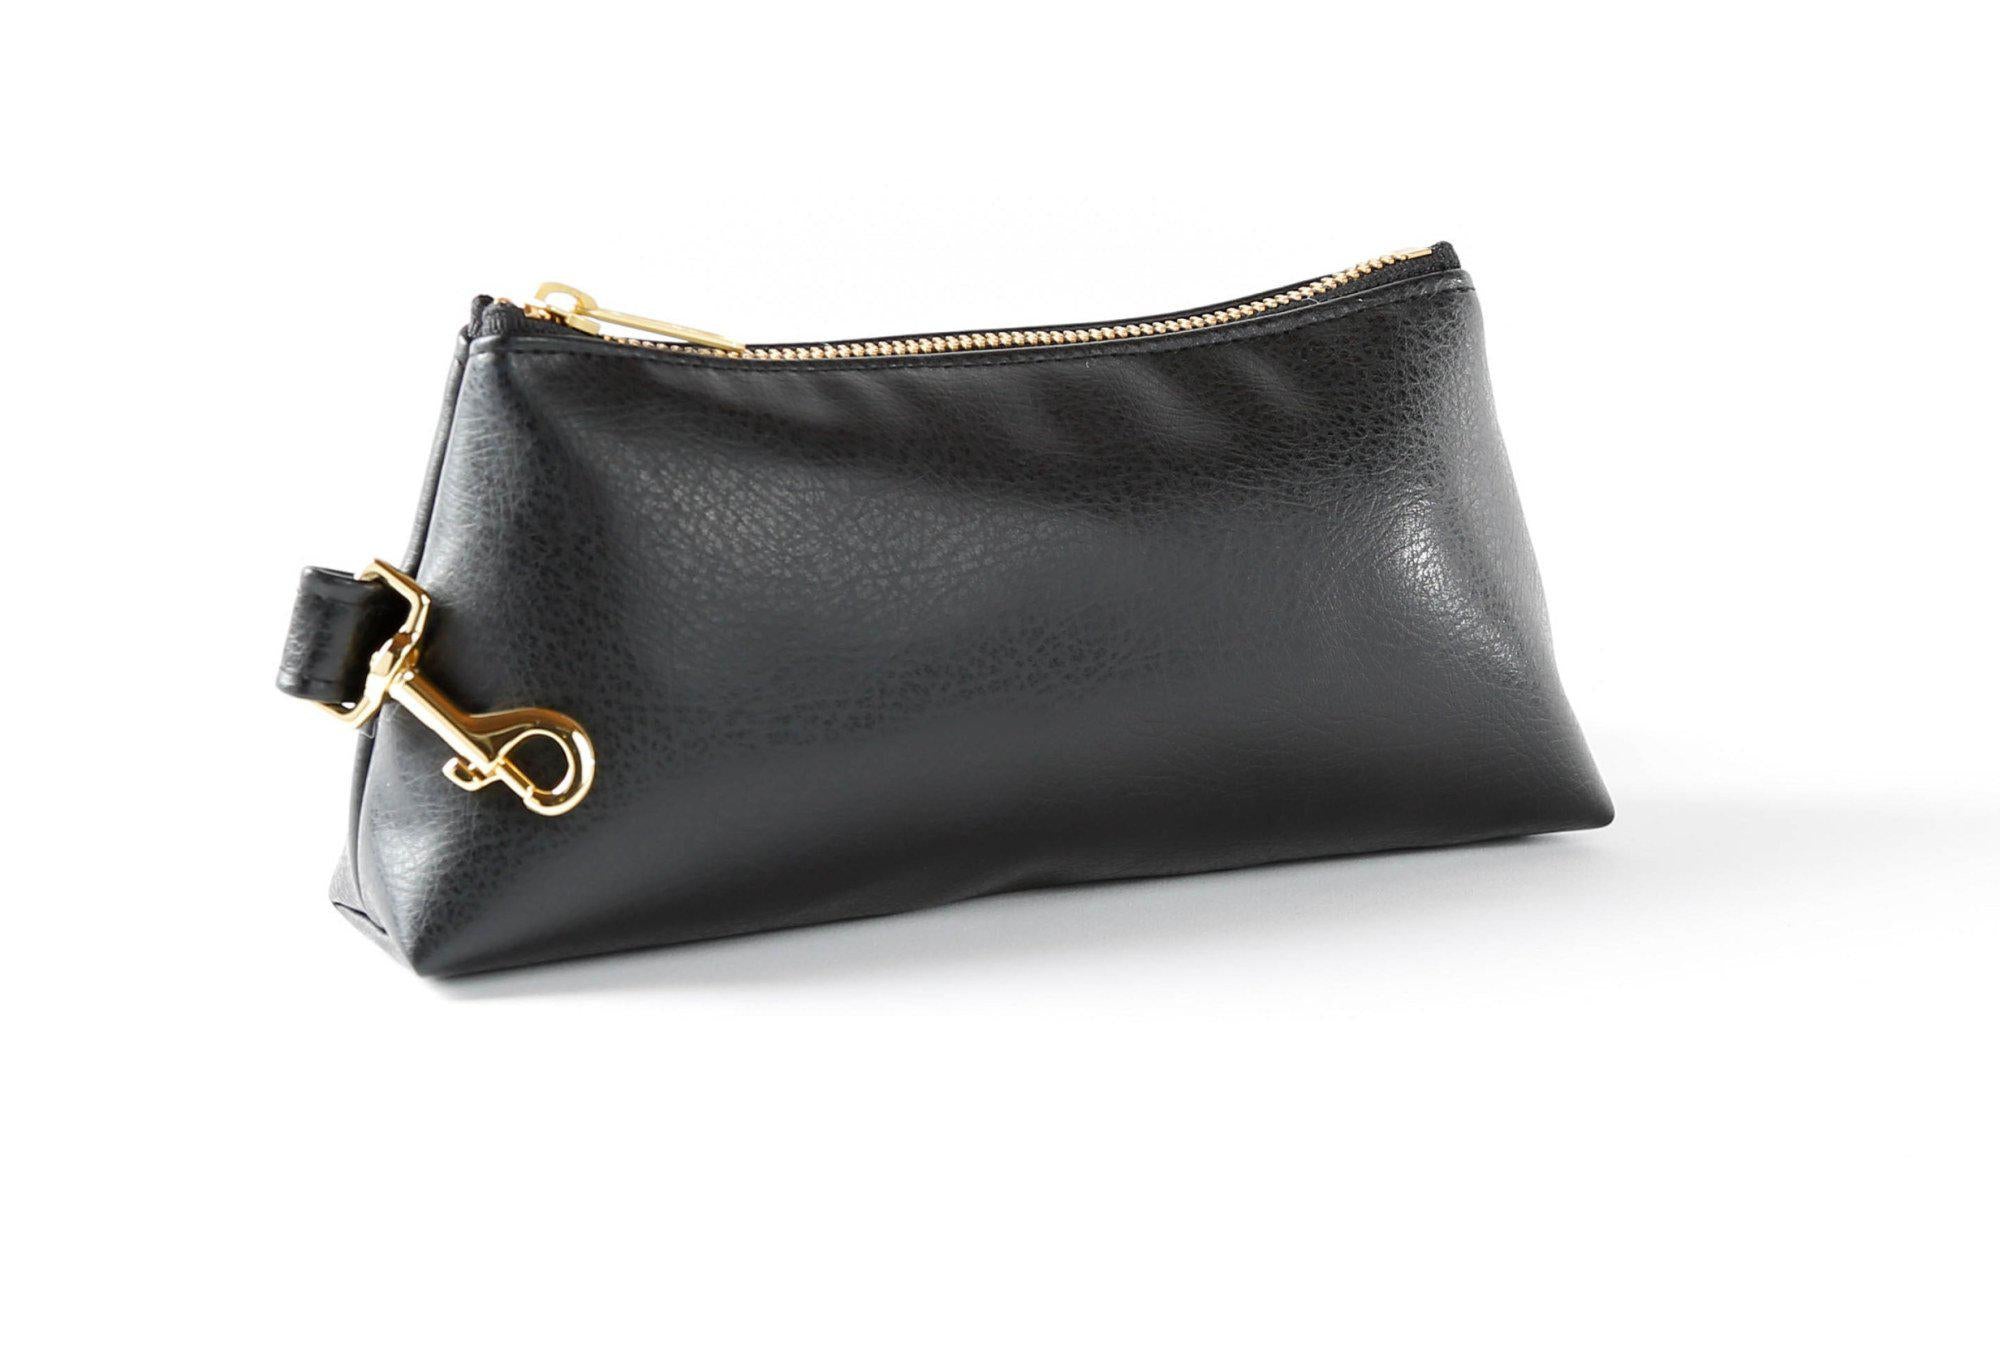 Mimco Classy Black Wristlet / Small Pouch / Purse / Small Evening Bag - RRP  $69.00 (s)